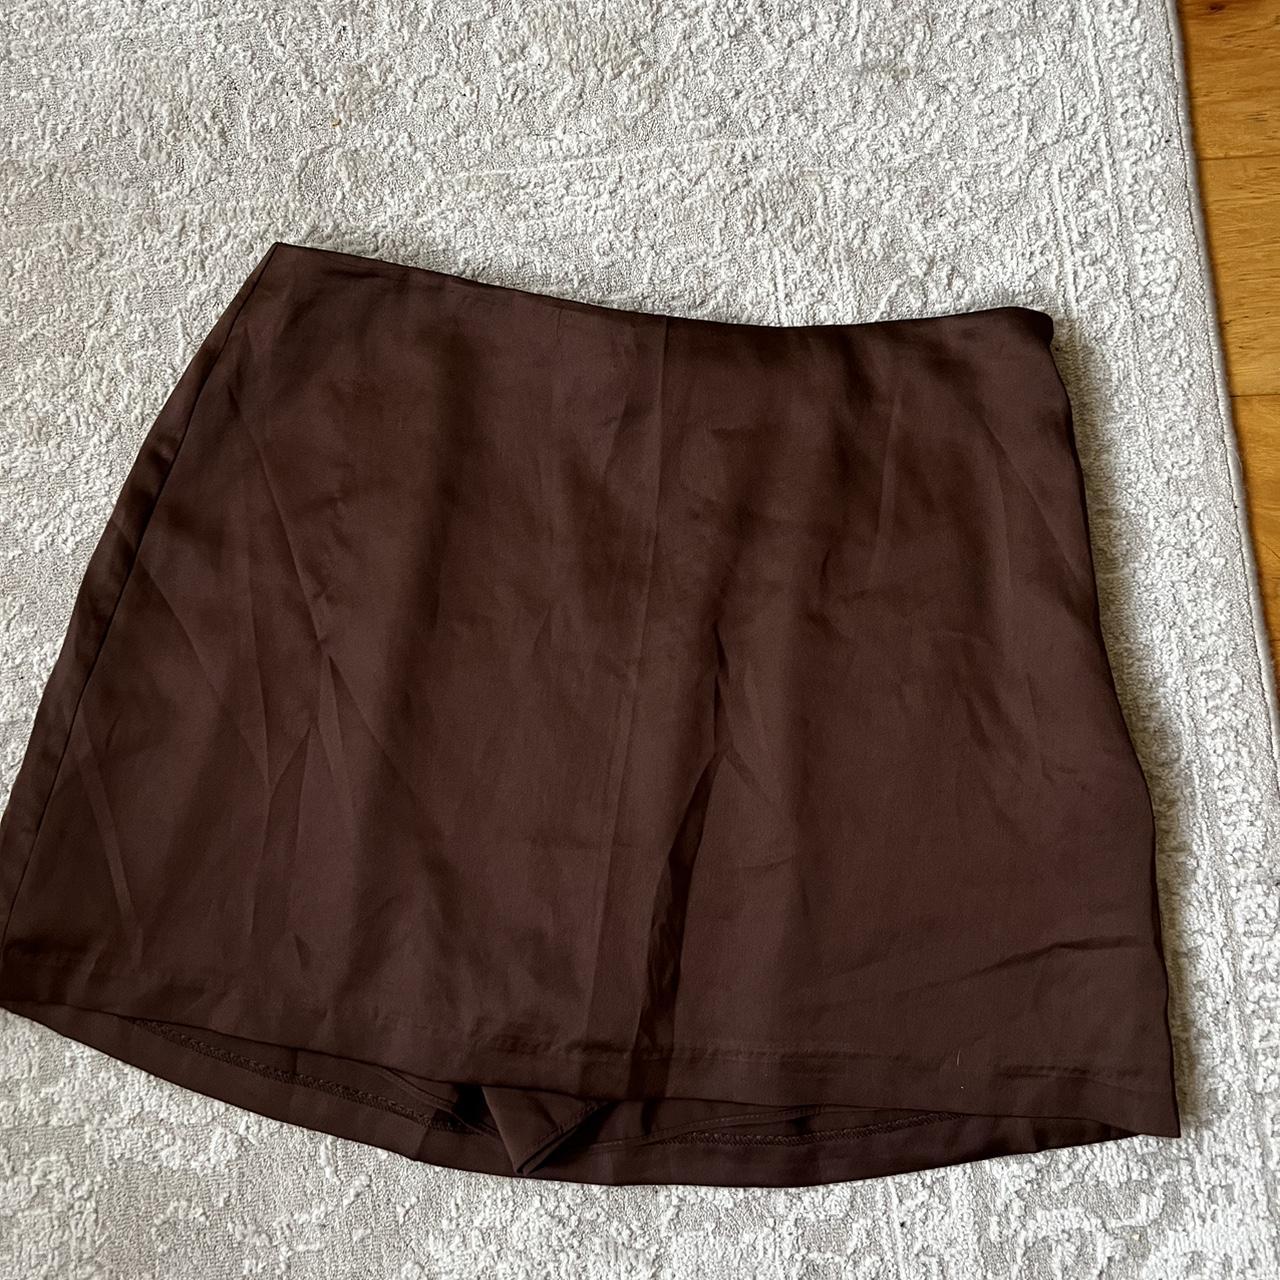 Abercrombie & Fitch Women's Brown Skirt (2)